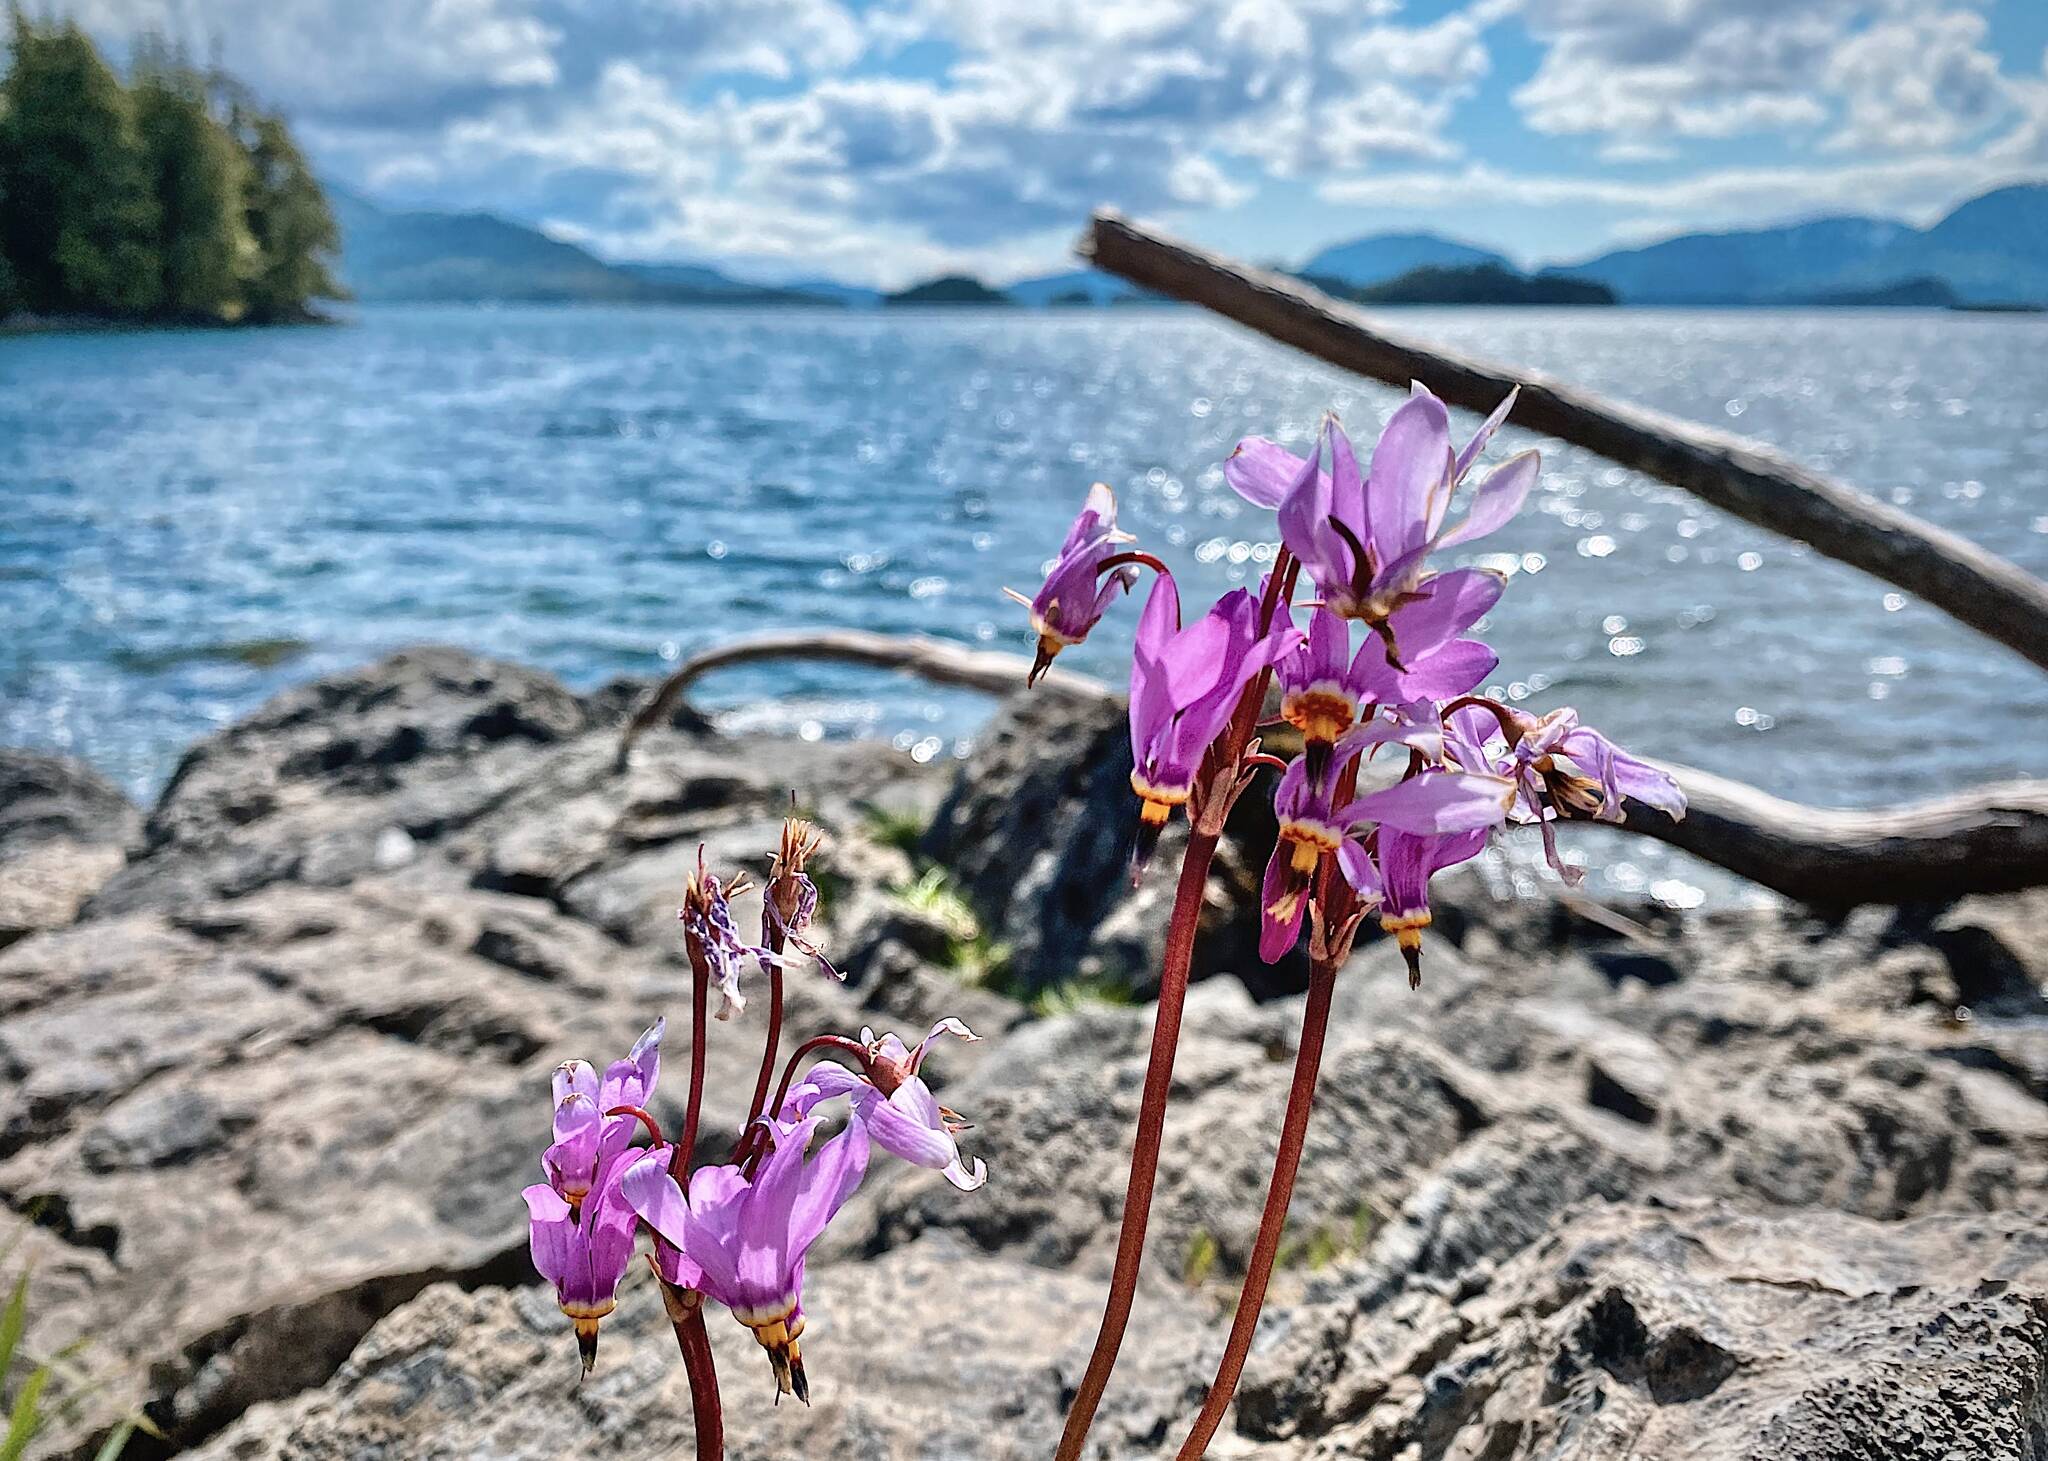 This May 13 photo shows a shooting star wildflower growing near the ocean in Craig. (Courtesy Photo / Marti Crutcher)